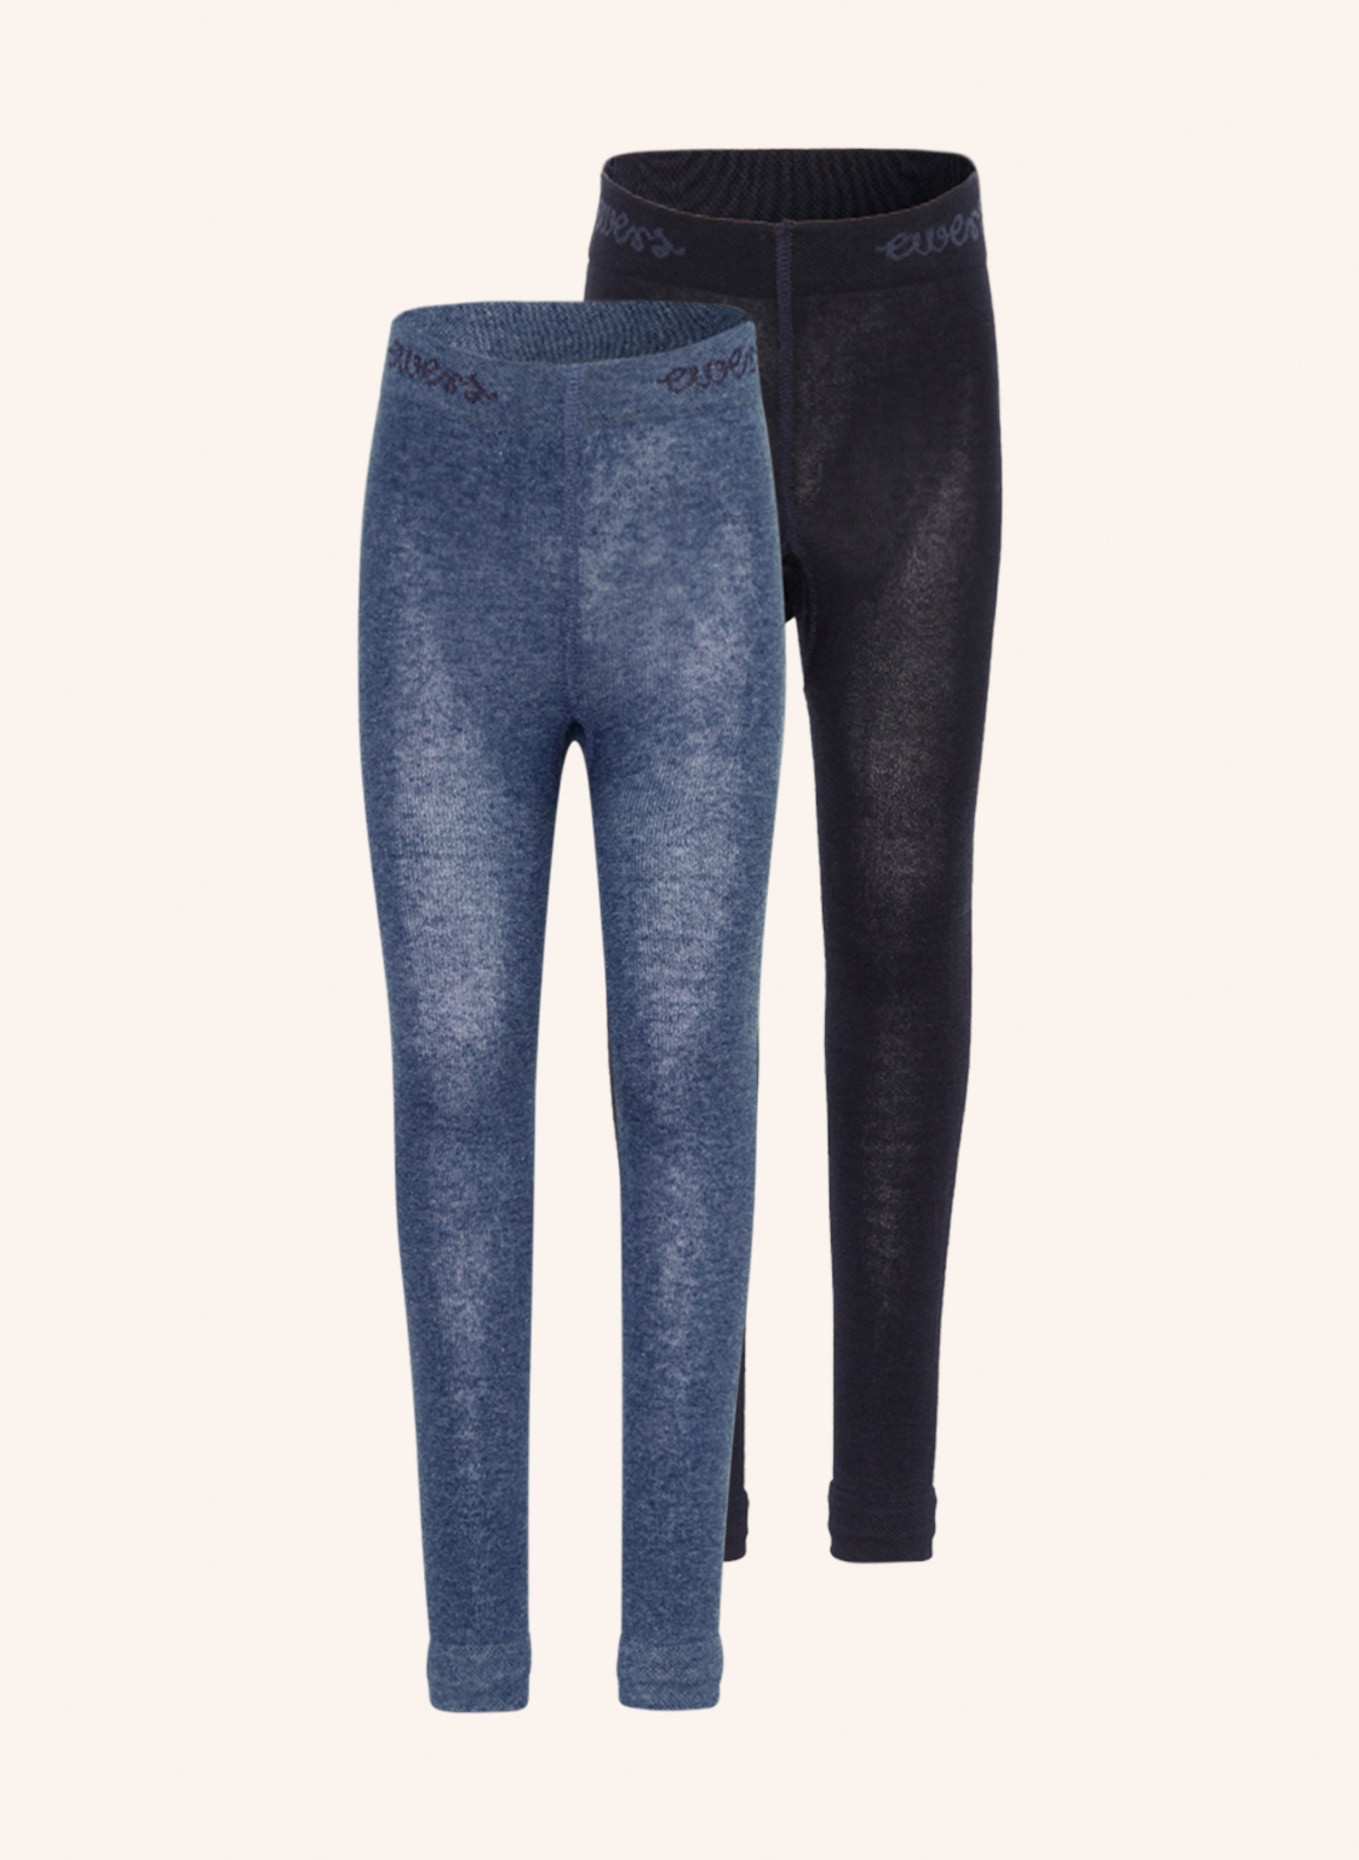 ewers COLLECTION 2-pack leggings, Color: BLUE/ DARK GRAY (Image 1)